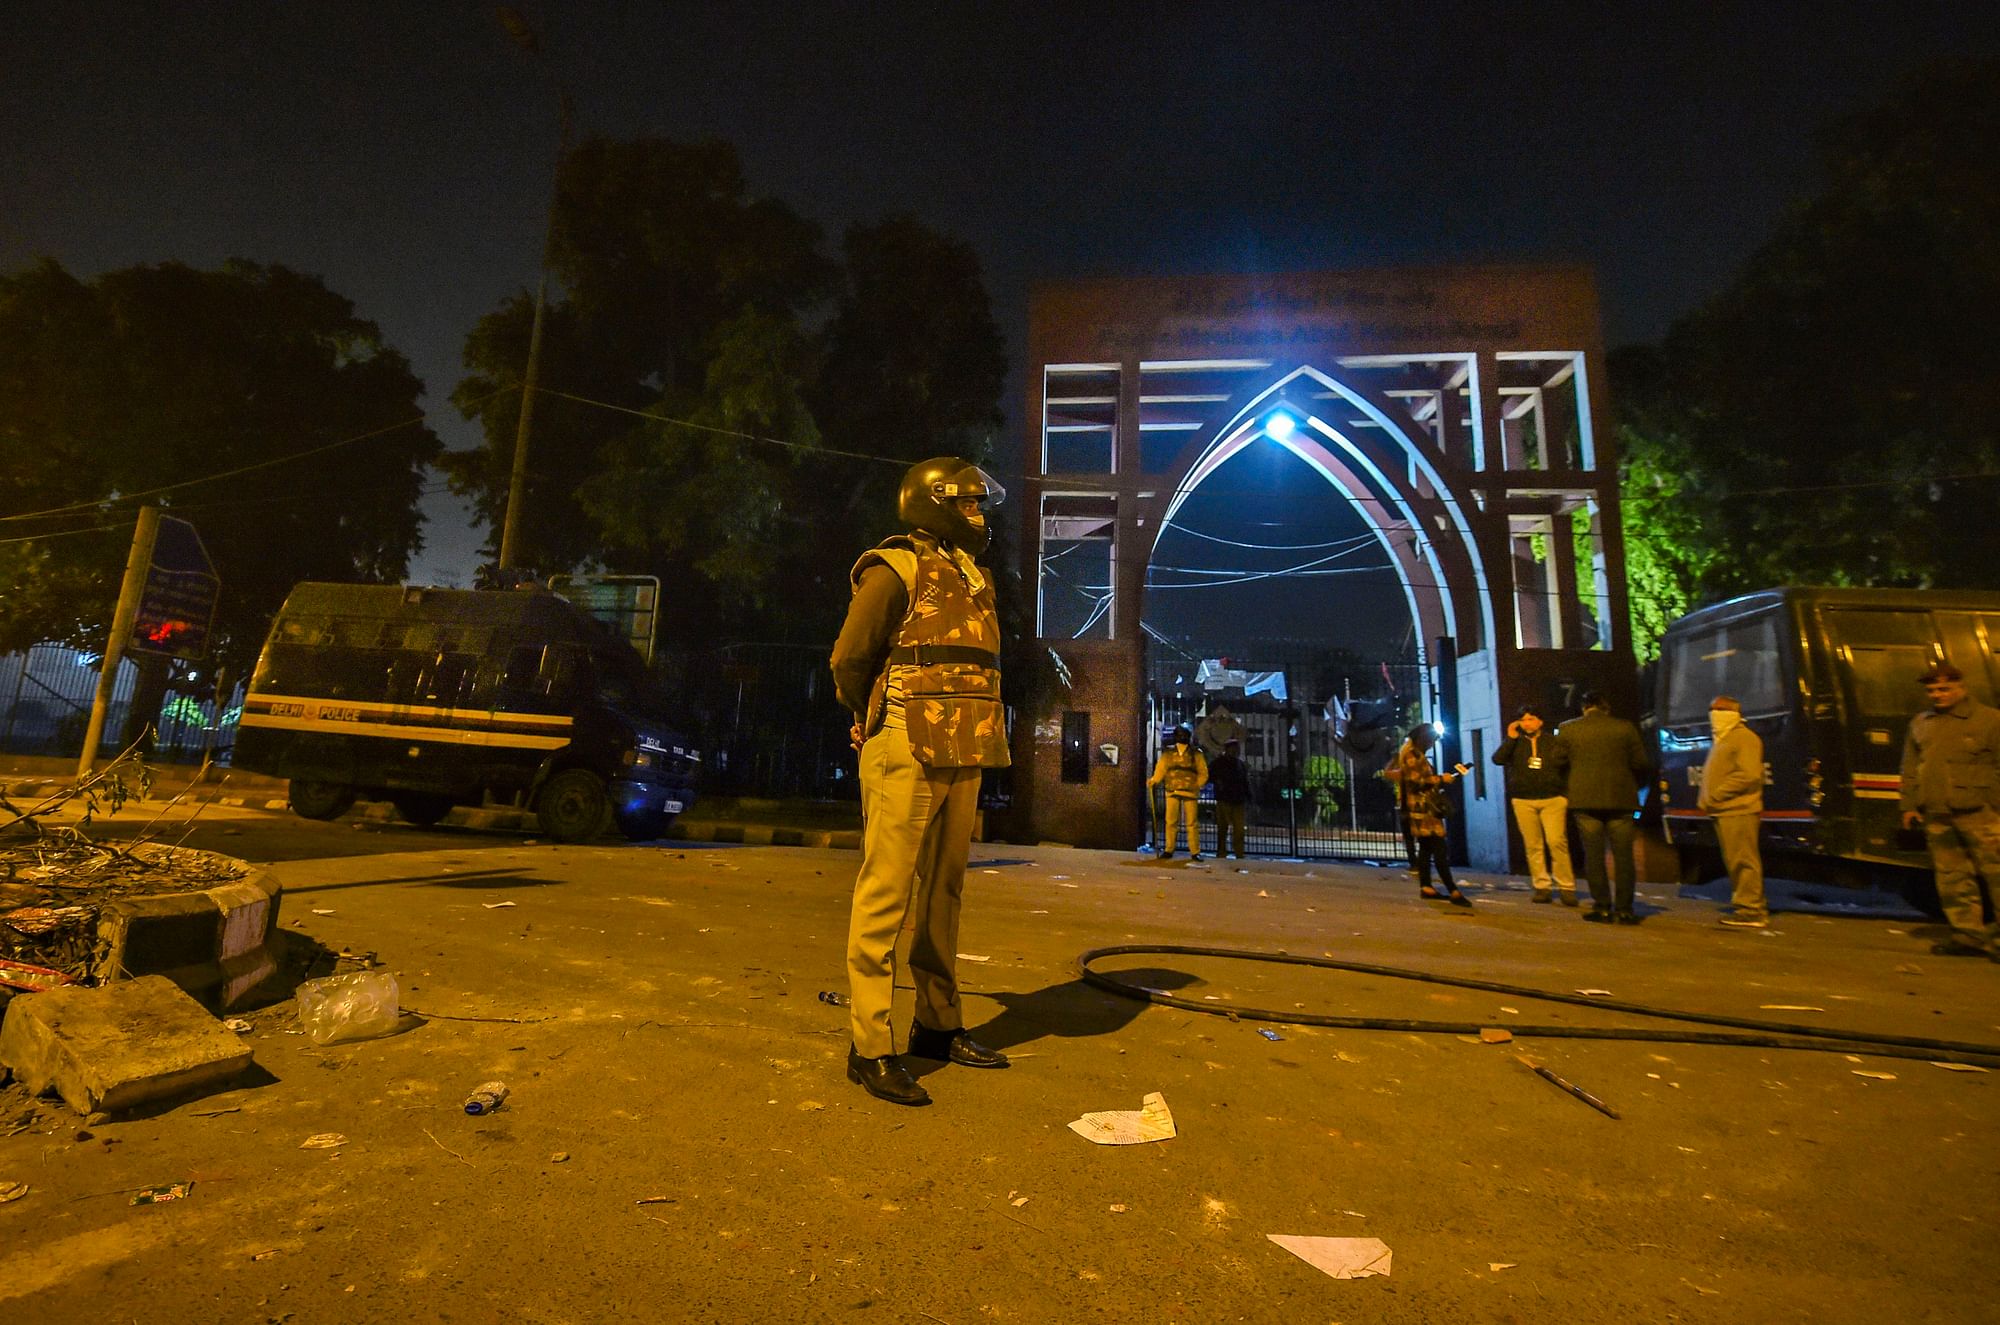 Policemen stand guard outside Jamia Millia Islamia following the protests against Citizenship Amendment Act, in New Delhi on Sunday, 15 December, 2019. Image used for representation.